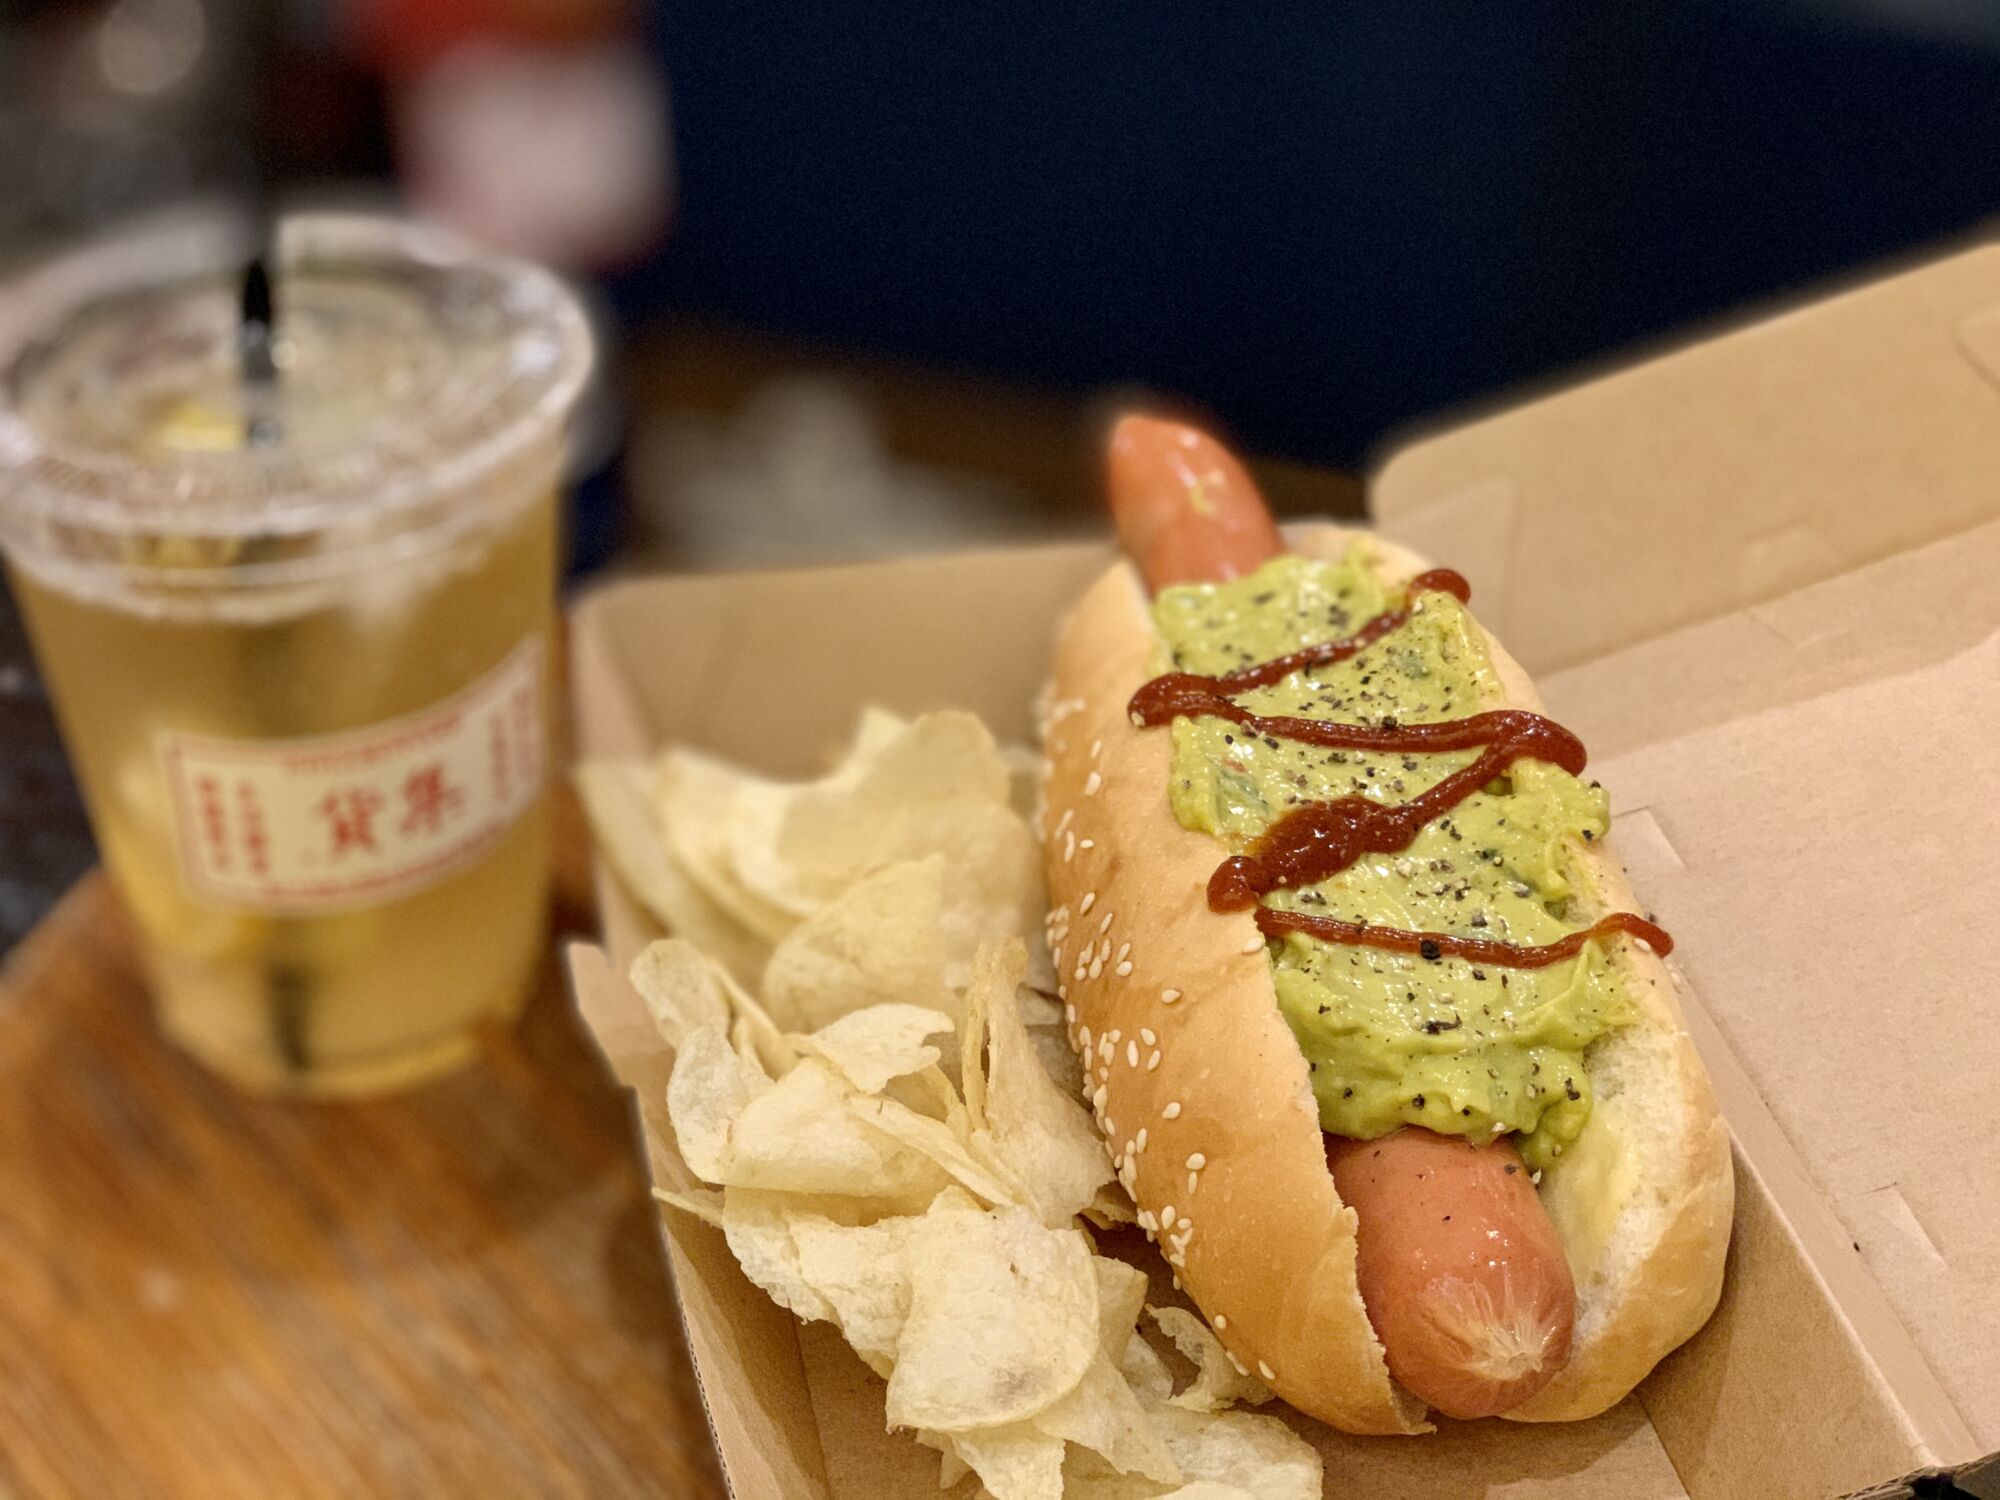 Collectore Shop Avocado Spicy Hot Dog and Drink on the Side Macau Lifestyle